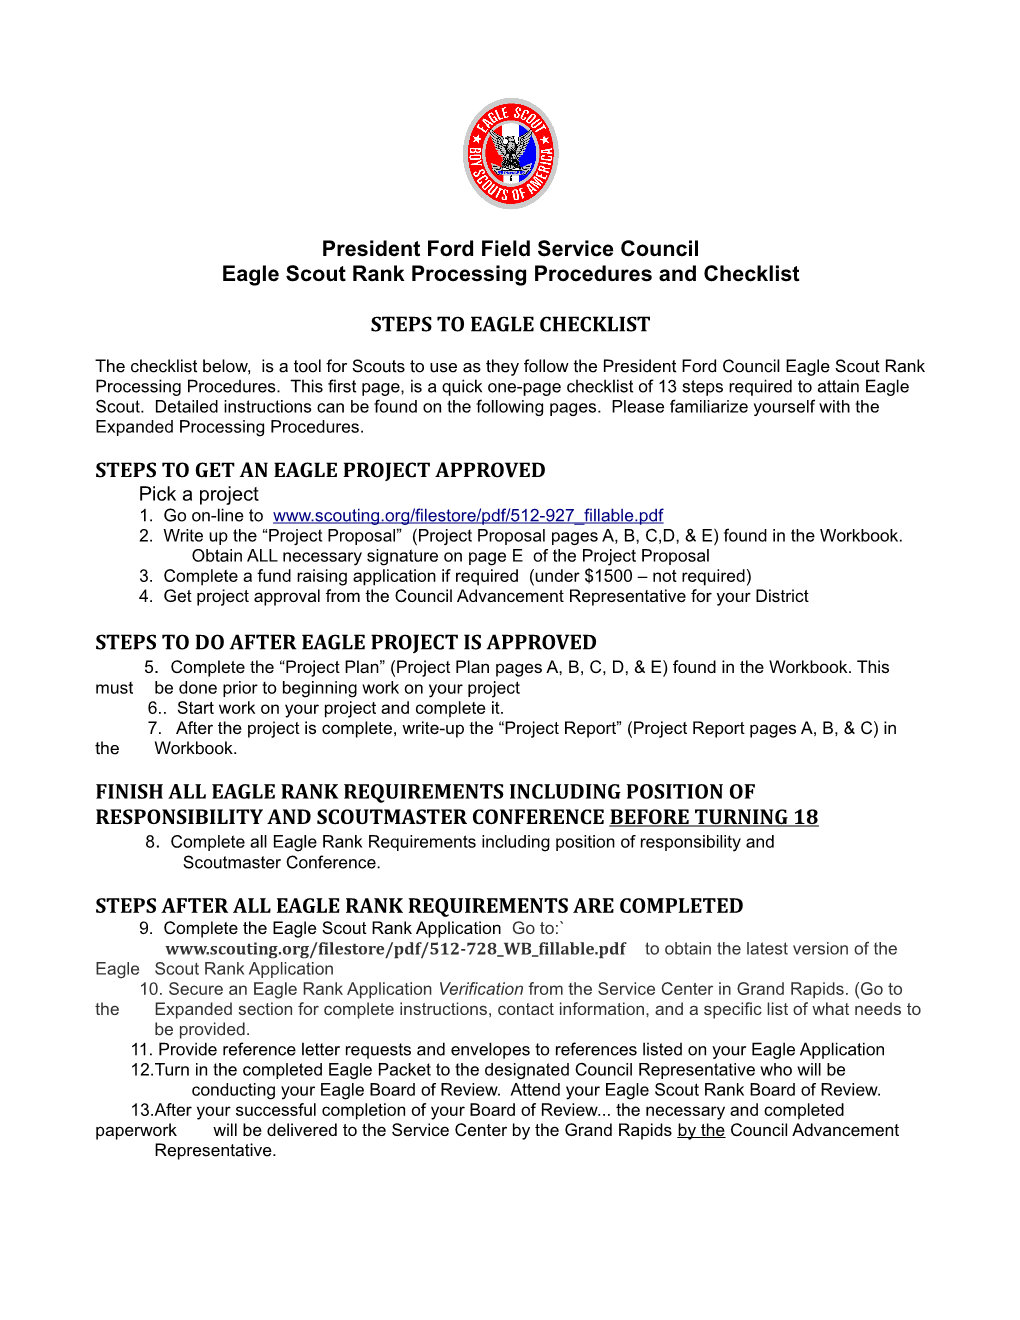 Eagle Scout Rank Processing Procedures and Checklist